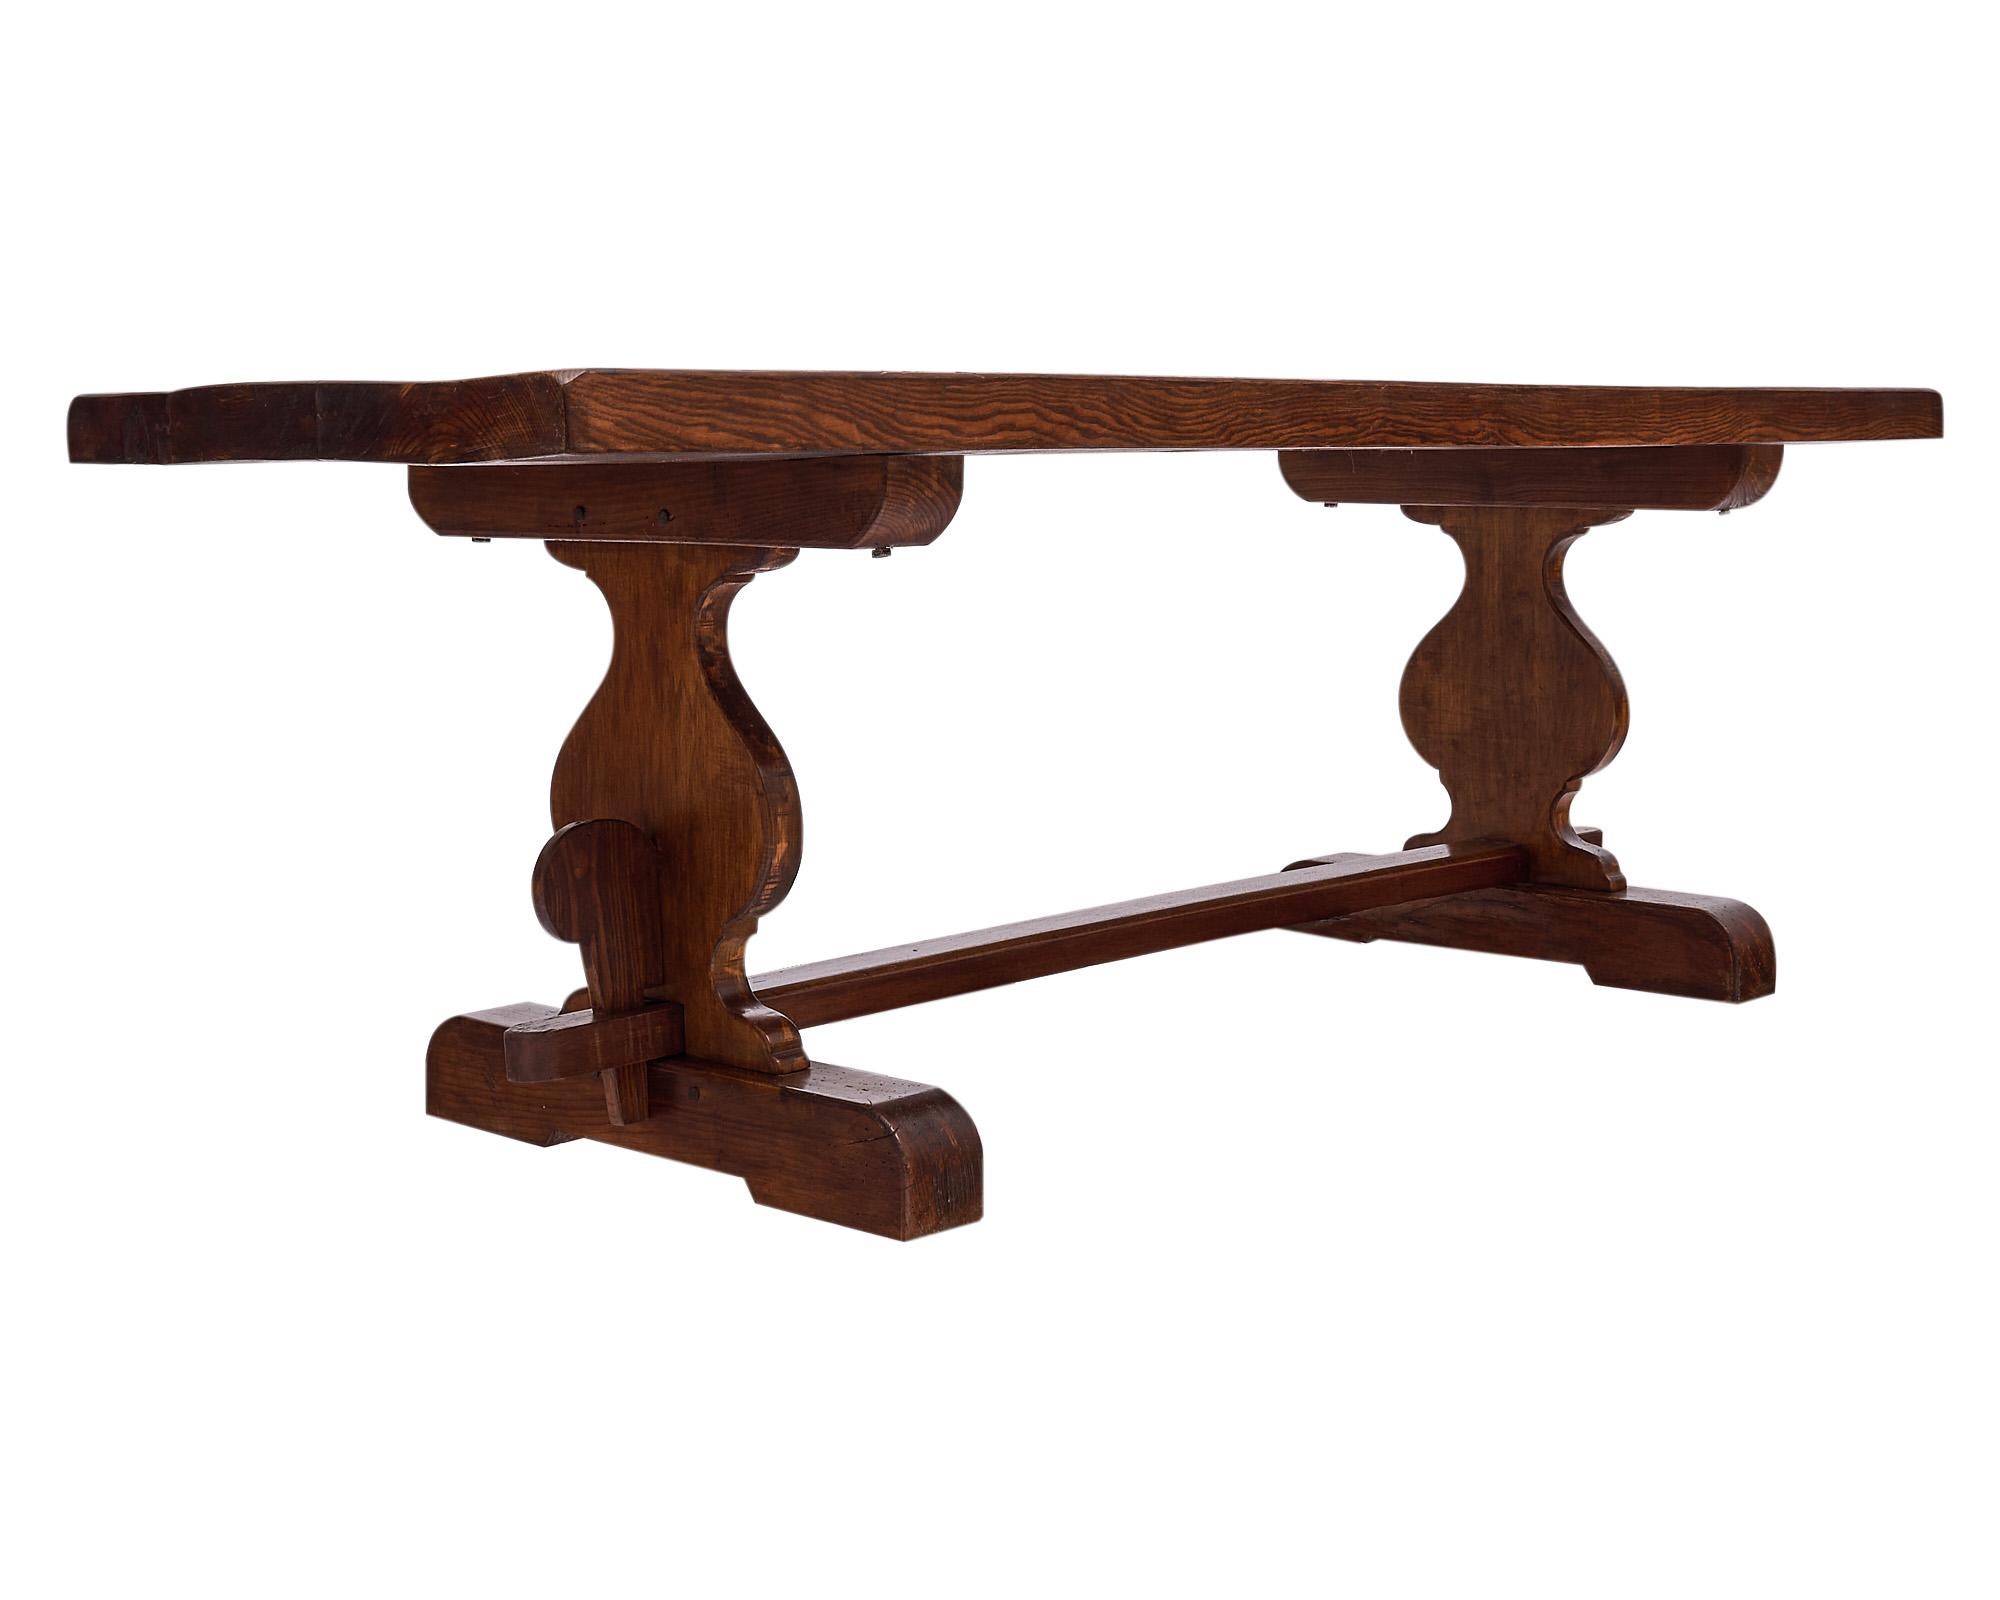 Dining table, French, made of walnut with “lyra” stylized pedestals. This piece has peg construction and is finished with a Carnauba wax finish. This piece is from the Rhone Valley.